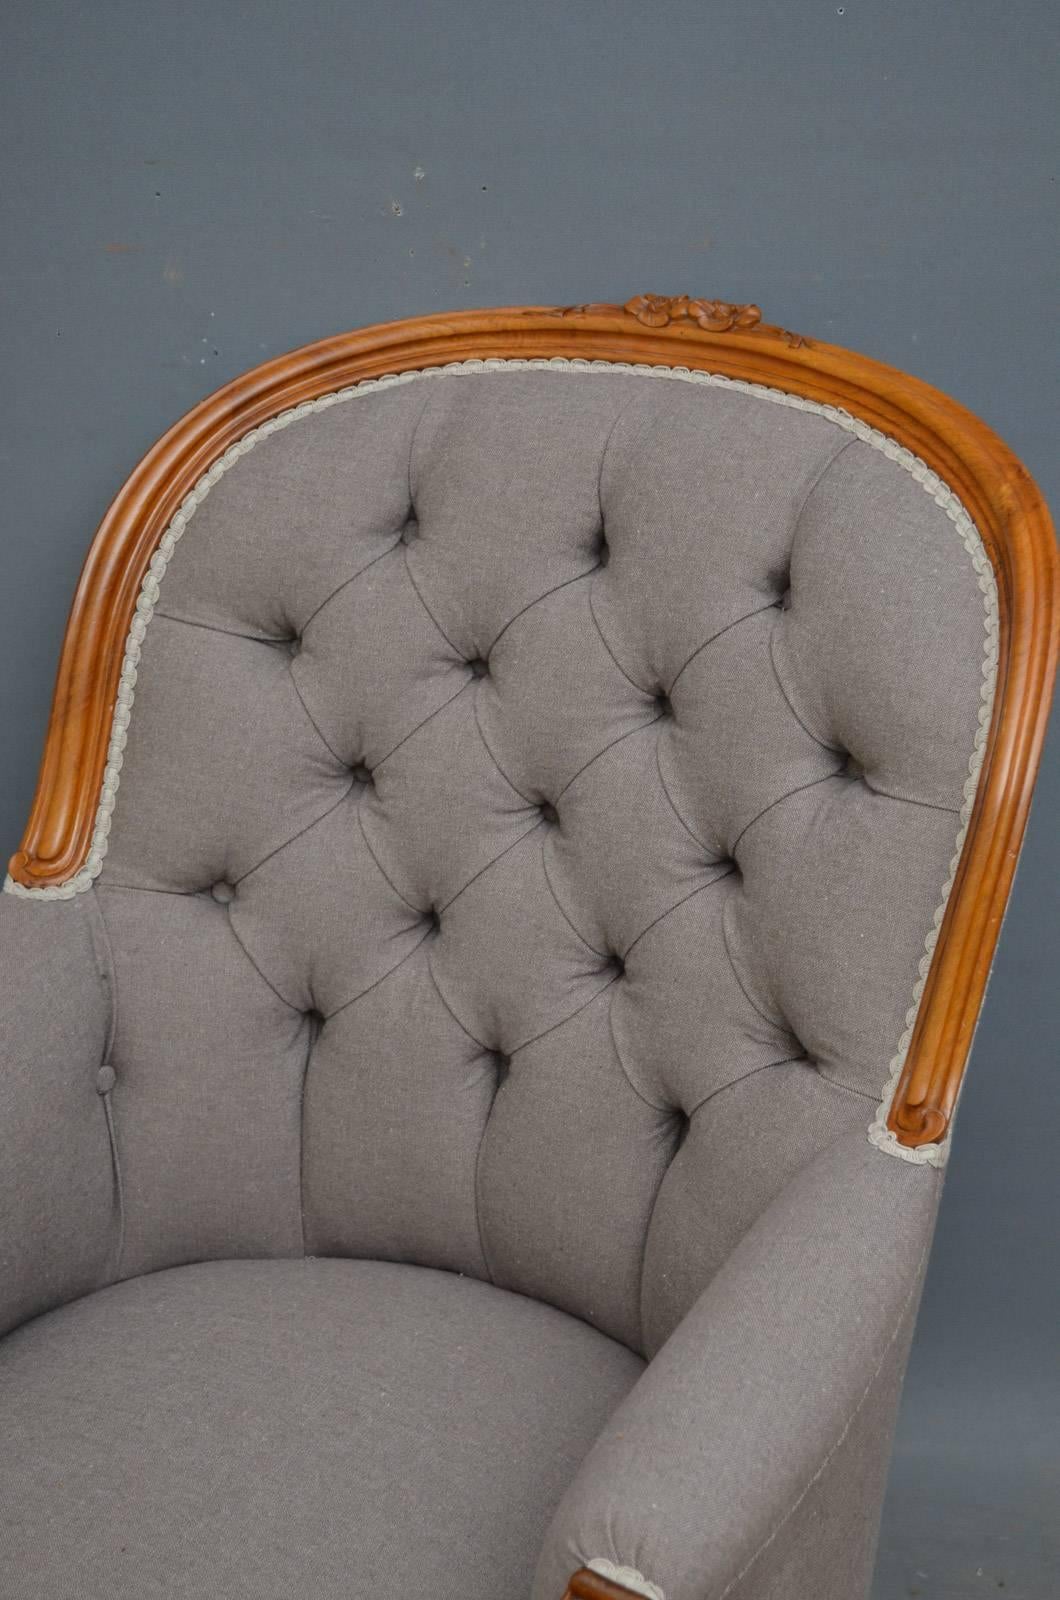 Sn2939 Victorian walnut armchair, having moulded frame with floral carving to centre, buttoned back and generous seat with carving to centre, flanked by carved knurl arms and cabriole legs, standing on original brass castors. This antique armchair